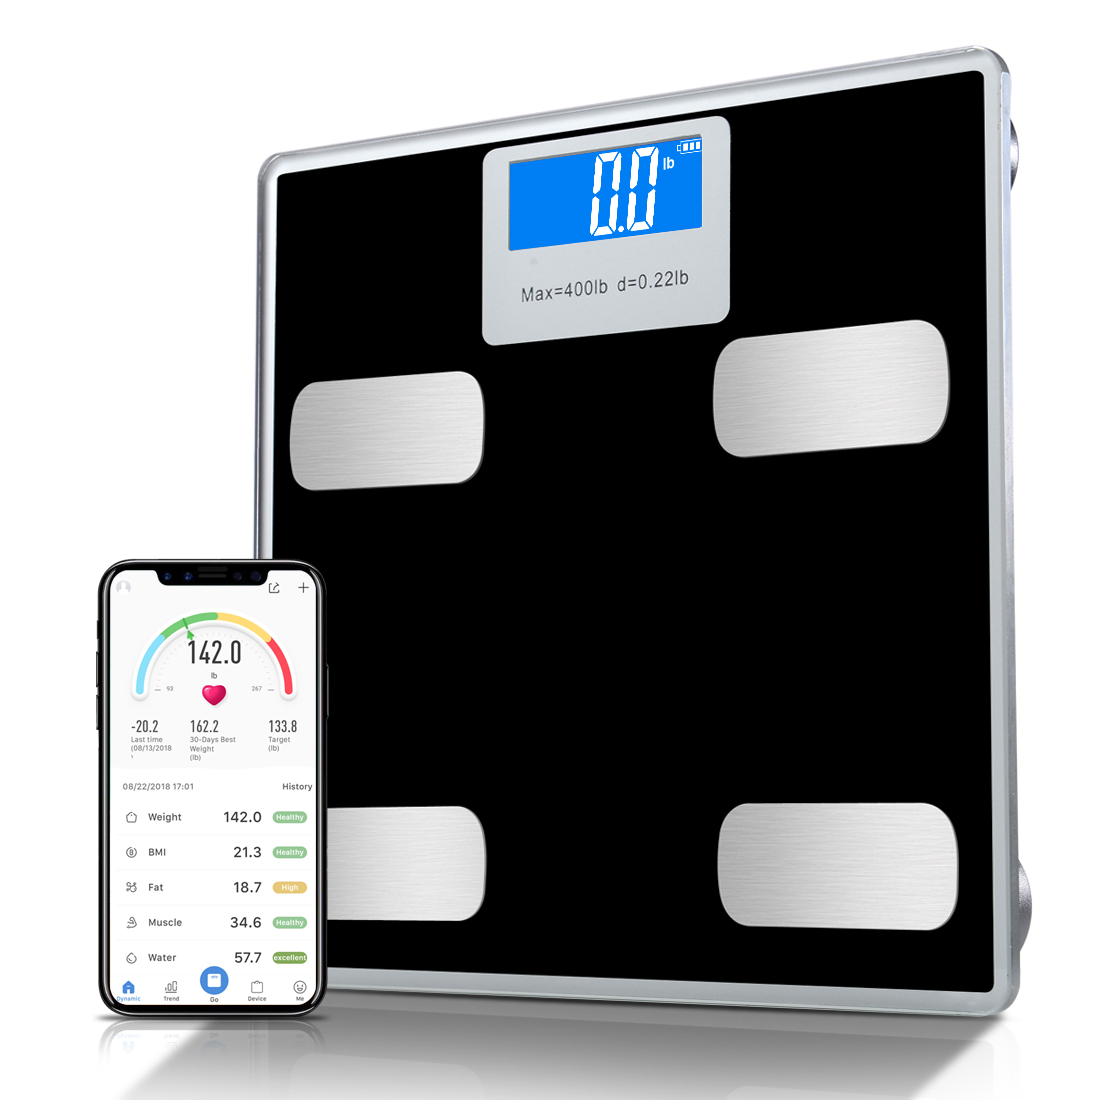 Portable Home Fitness Body Manage Electric Bluetooth Body Scale Made In China Android/Apple System Support Lose weight scale